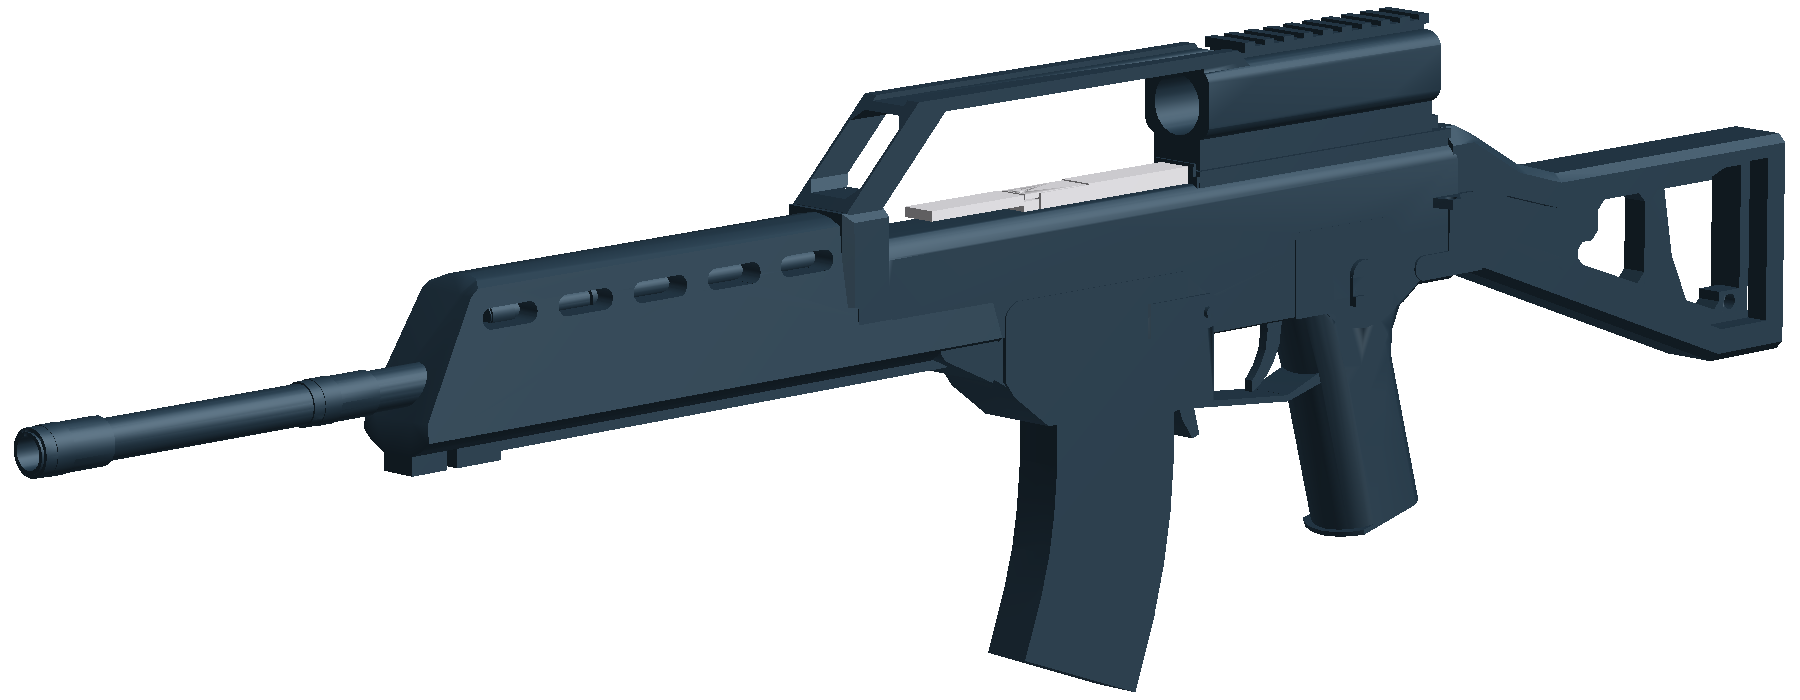 G36 Phantom Forces Wiki Fandom - roblox phantom forces how to use canted sights